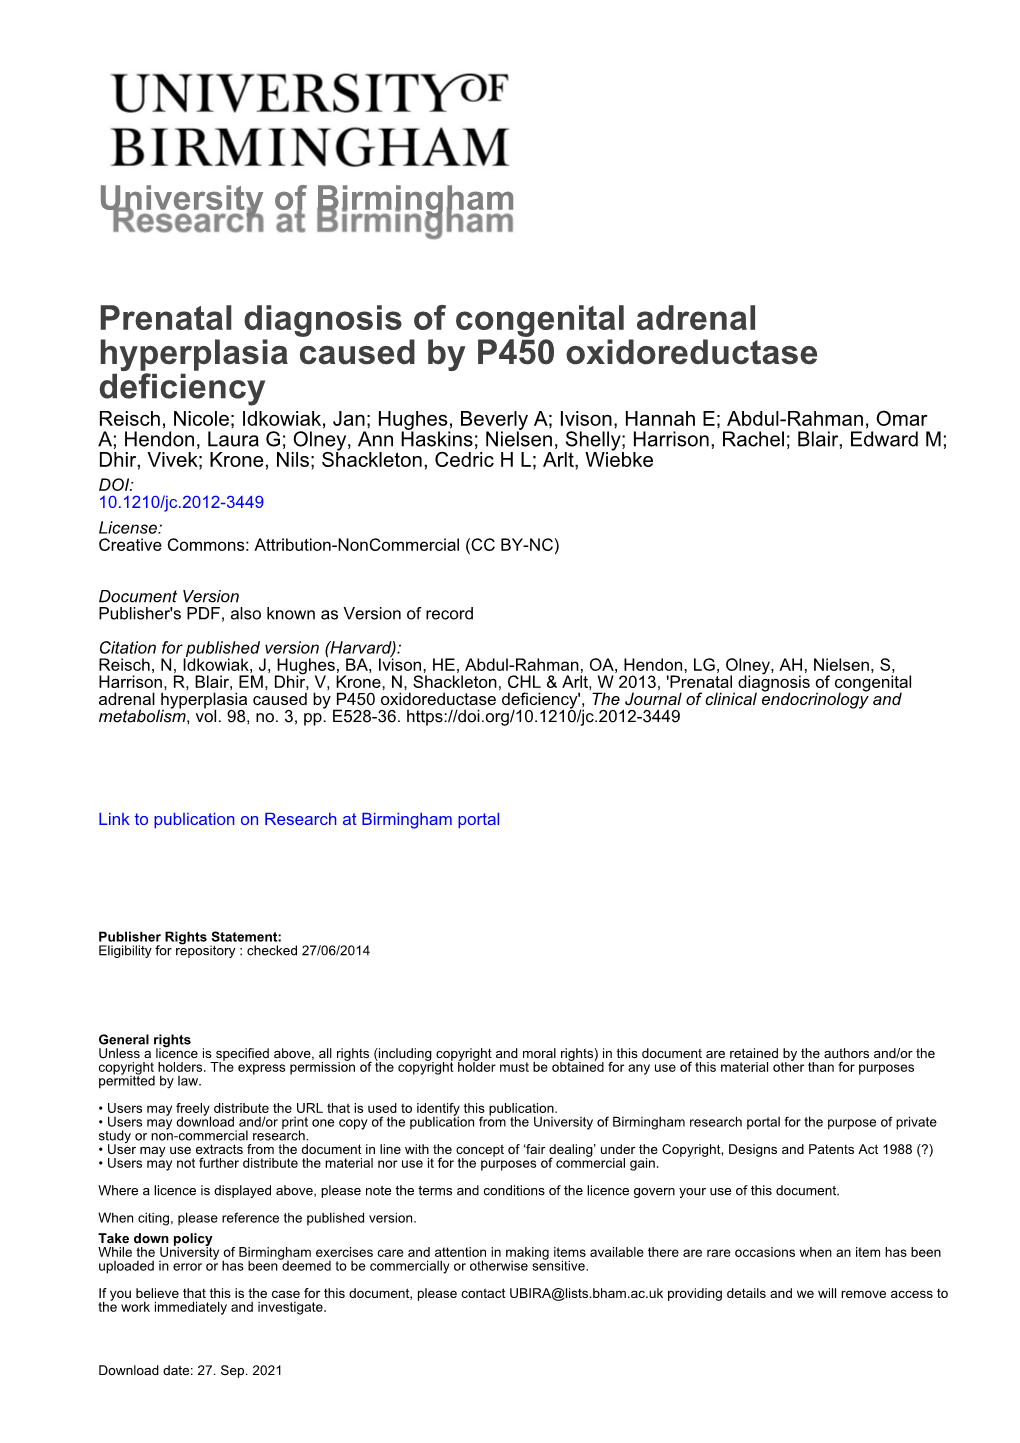 Prenatal Diagnosis of Congenital Adrenal Hyperplasia Caused By